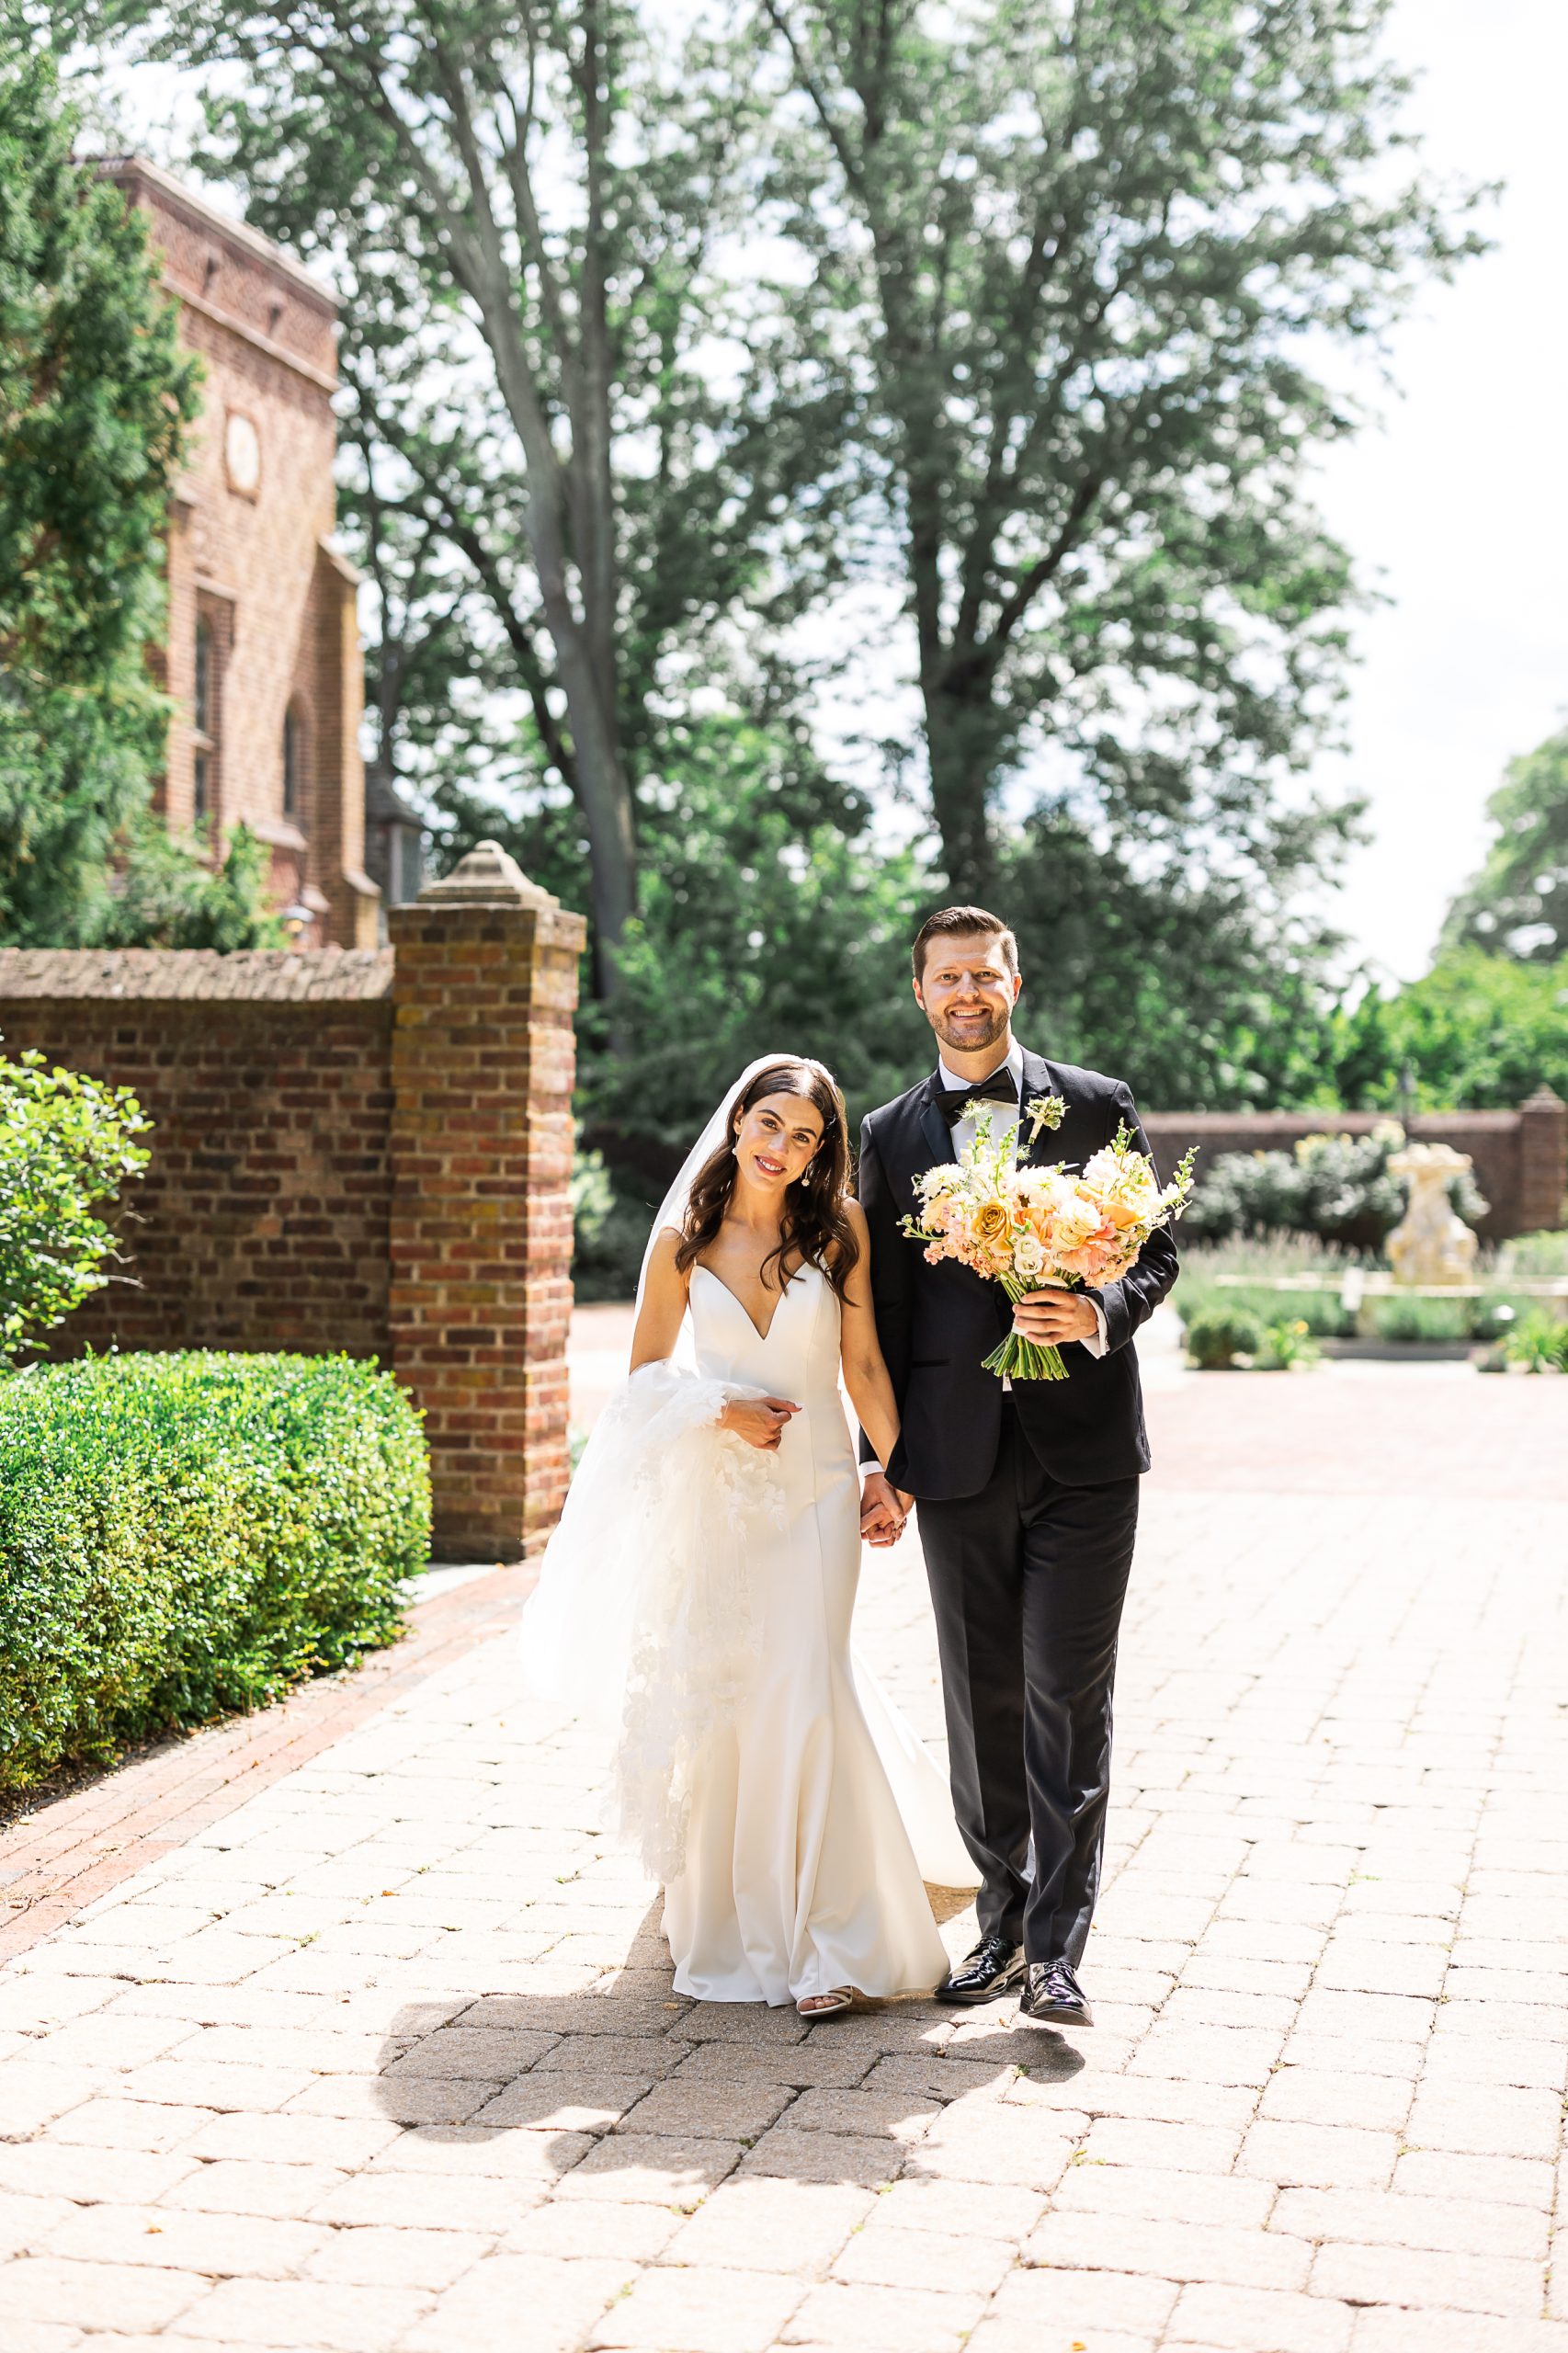 Morgan and Andrew's Golden Hour Aldie Mansion Wedding in Doylestown, PA